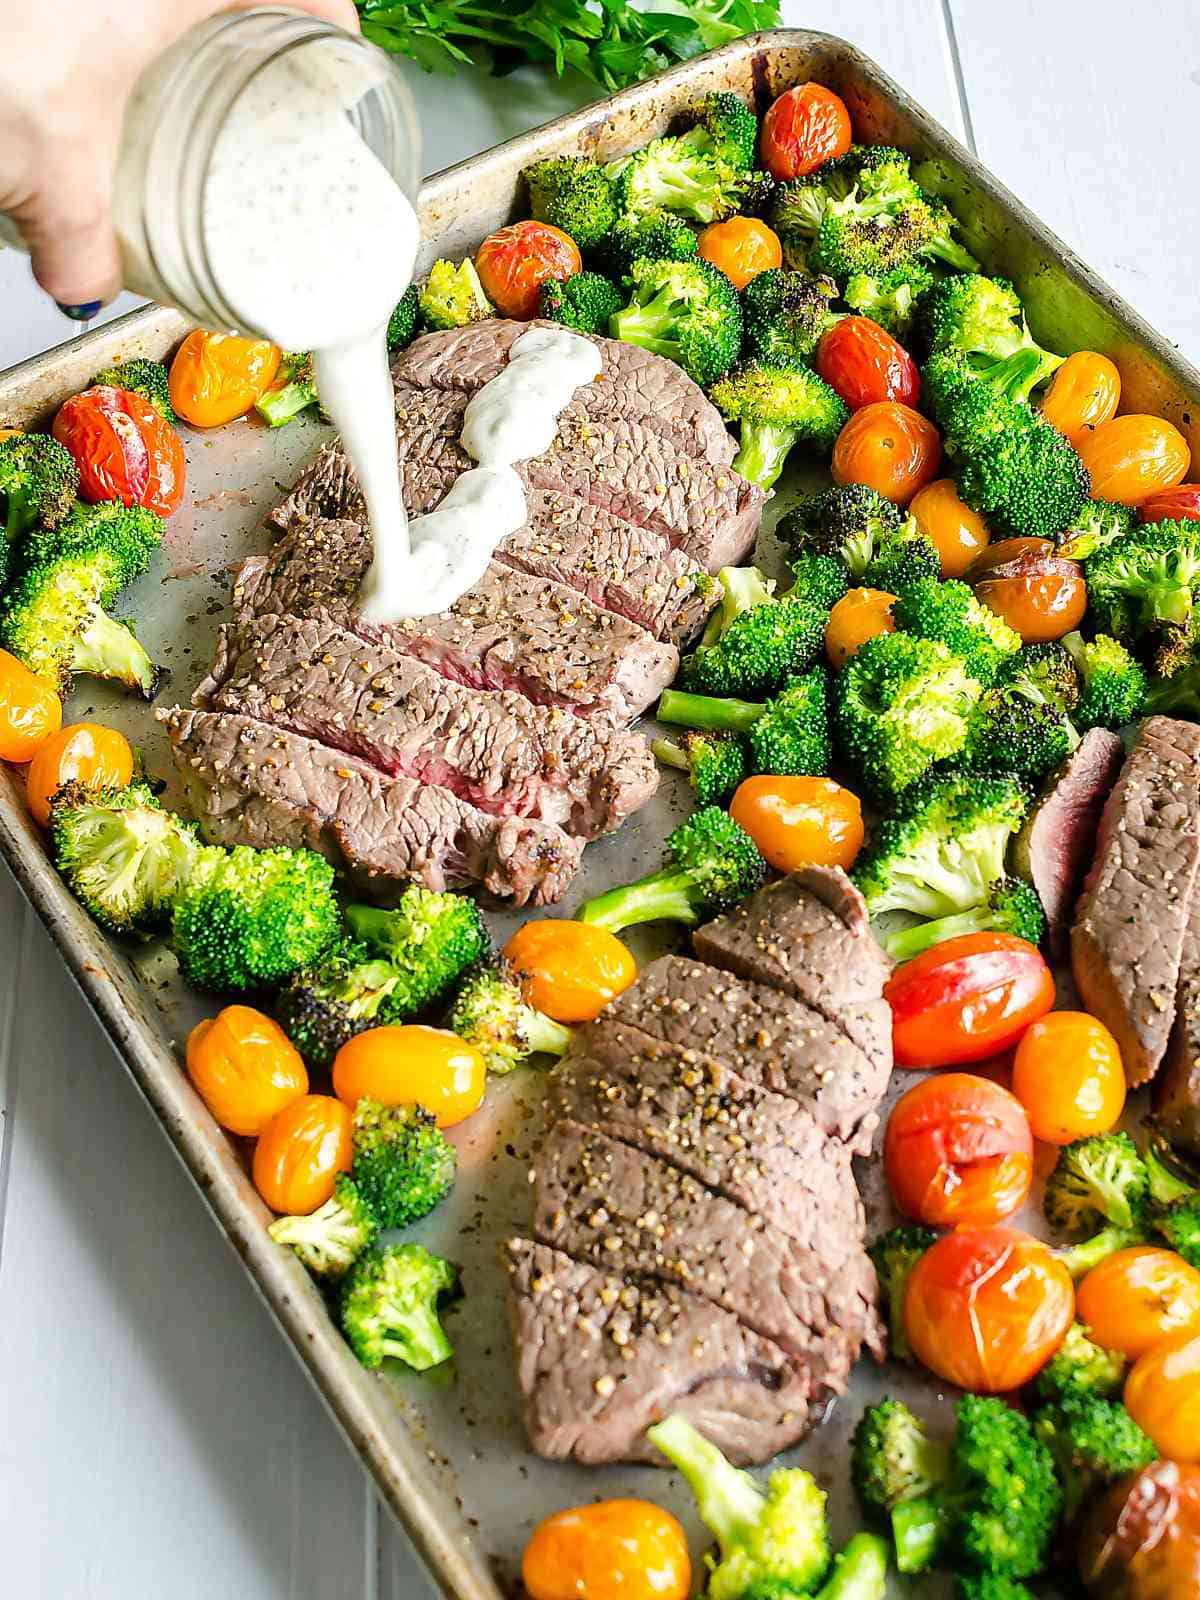 Homemade boursin cheese sauce being poured over sliced steak on a sheet pan surrounded with broccoli and cherry tomatoes.